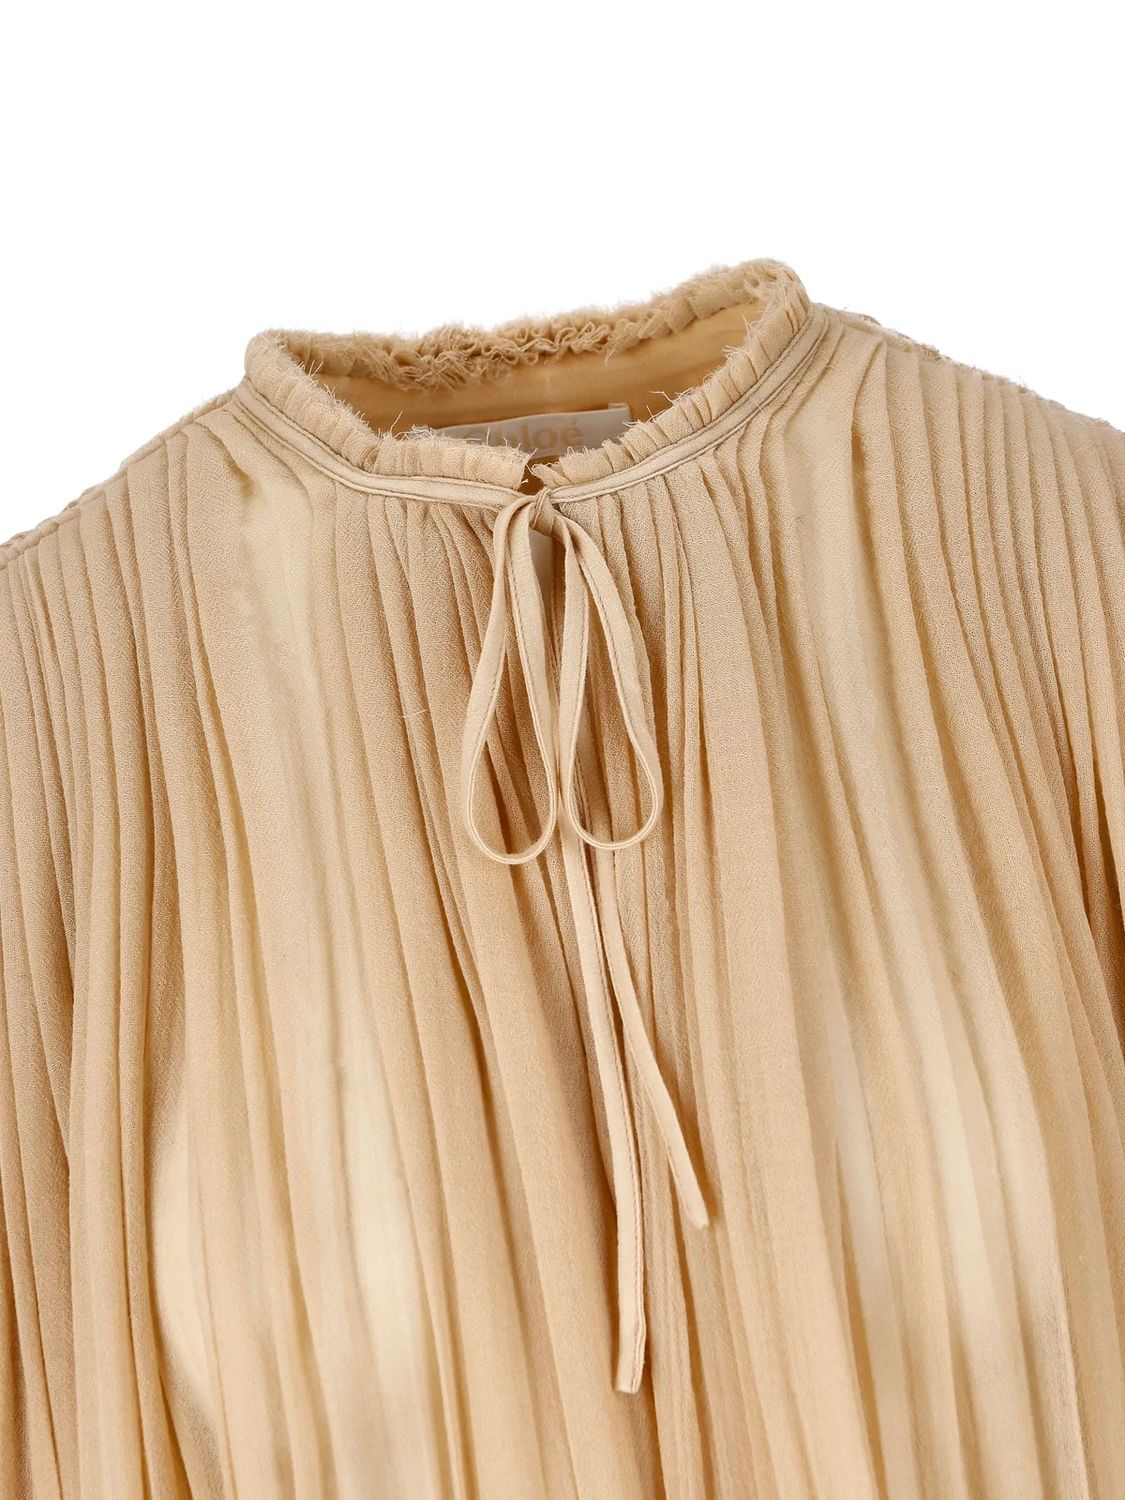 CHLOÉ Barley Pleated Sand Color Women's Top for FW23